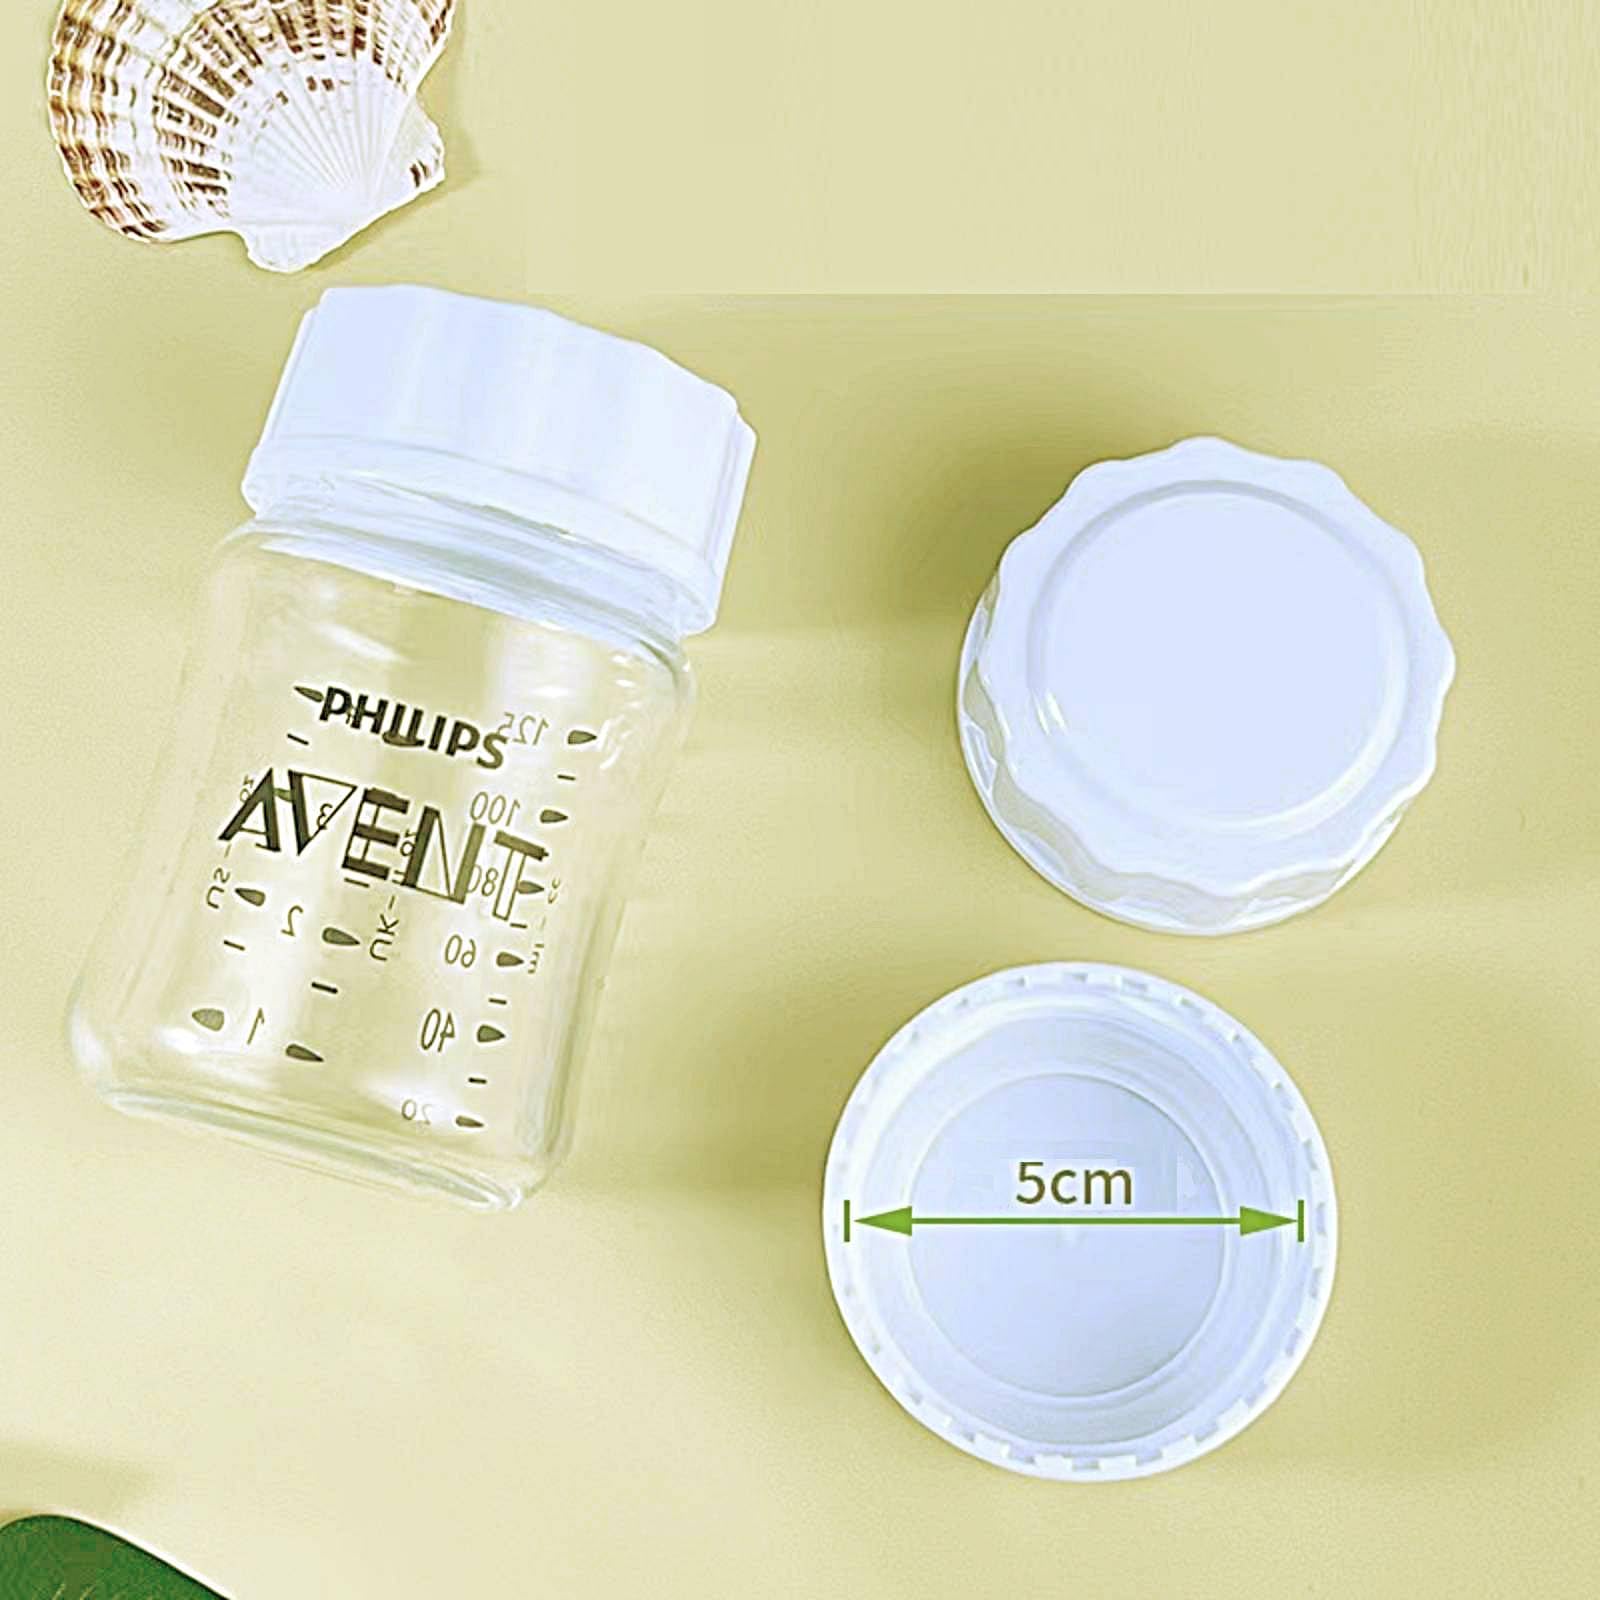 YeeBeny Baby Bottle Lid, Screw Lids Aka Travel Caps with Rewritable Sealing Disc Compatible with Avent Wide Mouth Bottles,Cap Replace Natural Bottle Sealing Ring and Sealing Disc, 4pcs Baby Bottle Cap